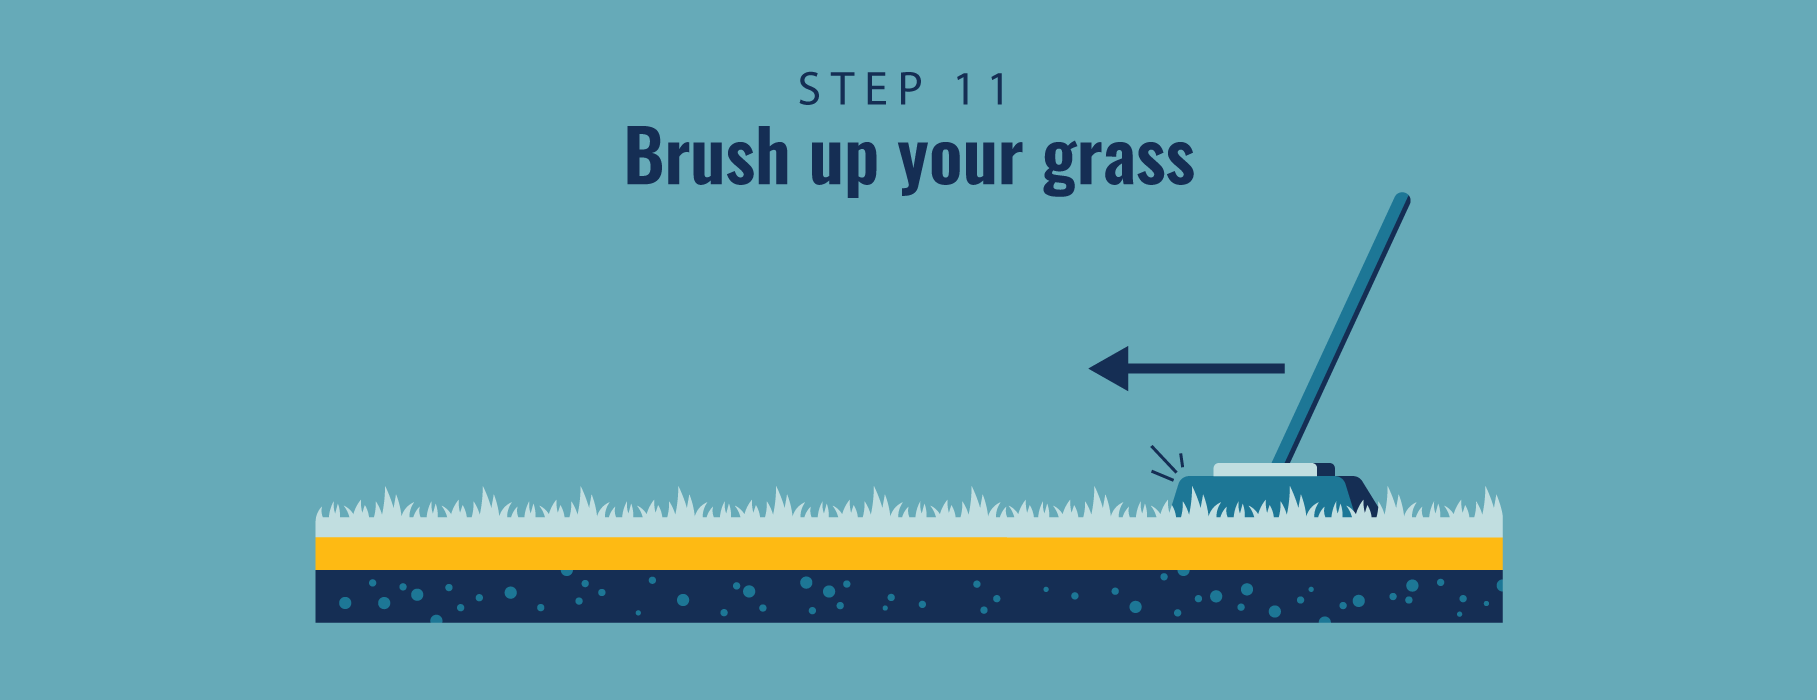 artificial turf step 11 brush up your grass